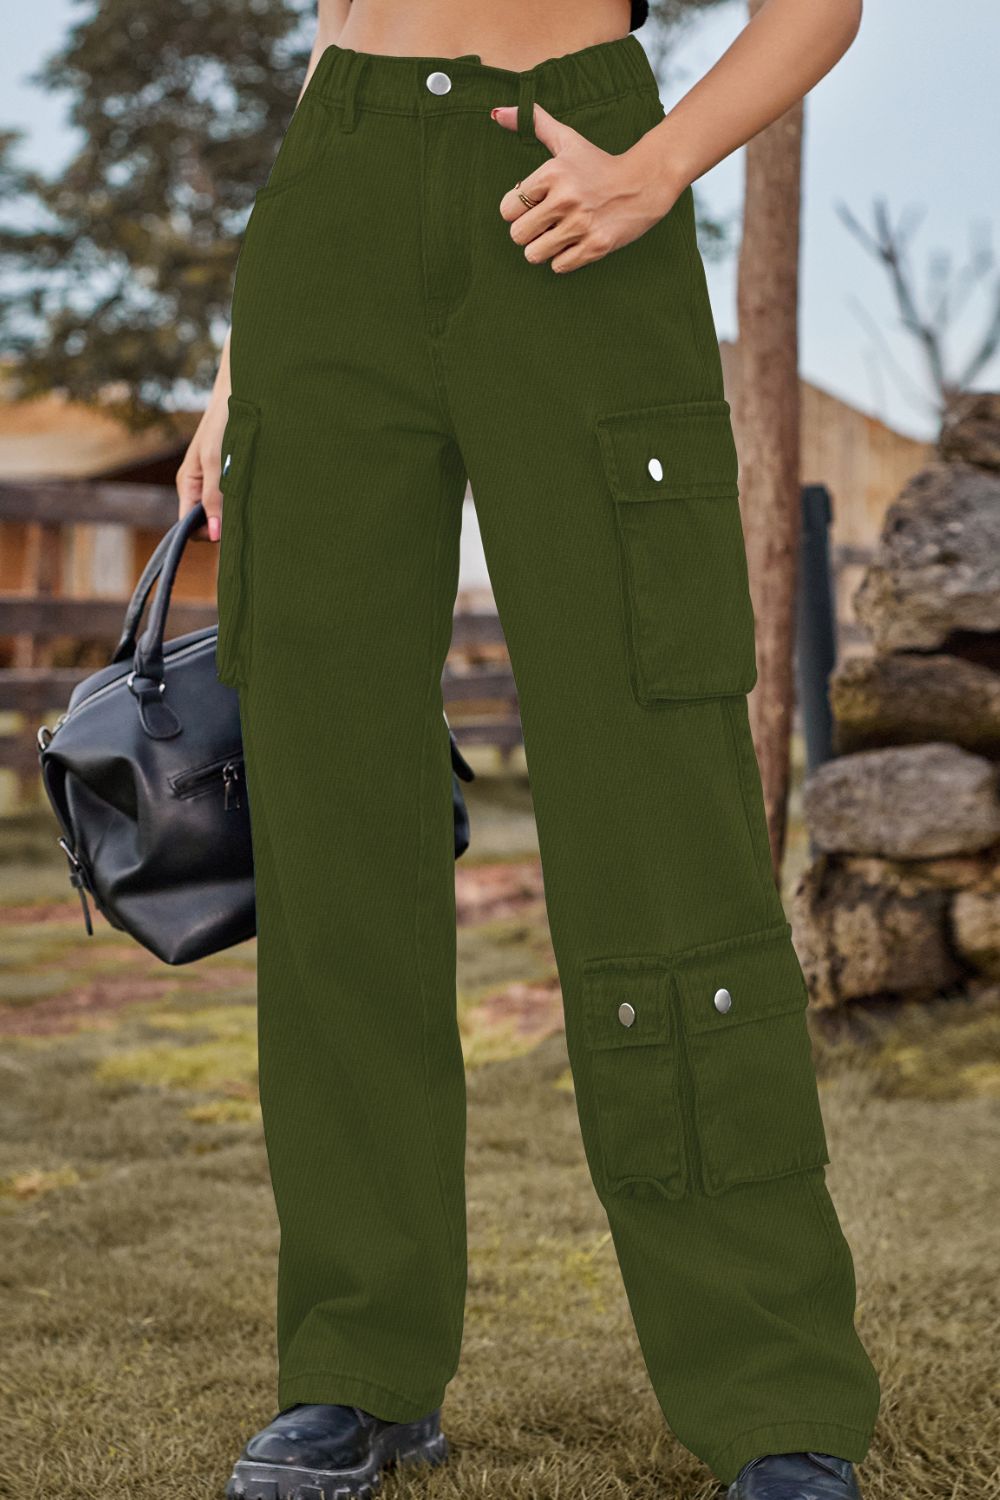 Cargo Pants Women Women's Fashion Casual Solid Color High Waist Cargo Pants  A-Line Loose Wide Leg Pocket Quick Drying Long Pants Hiking Pants Women  Military Pants With Belt 